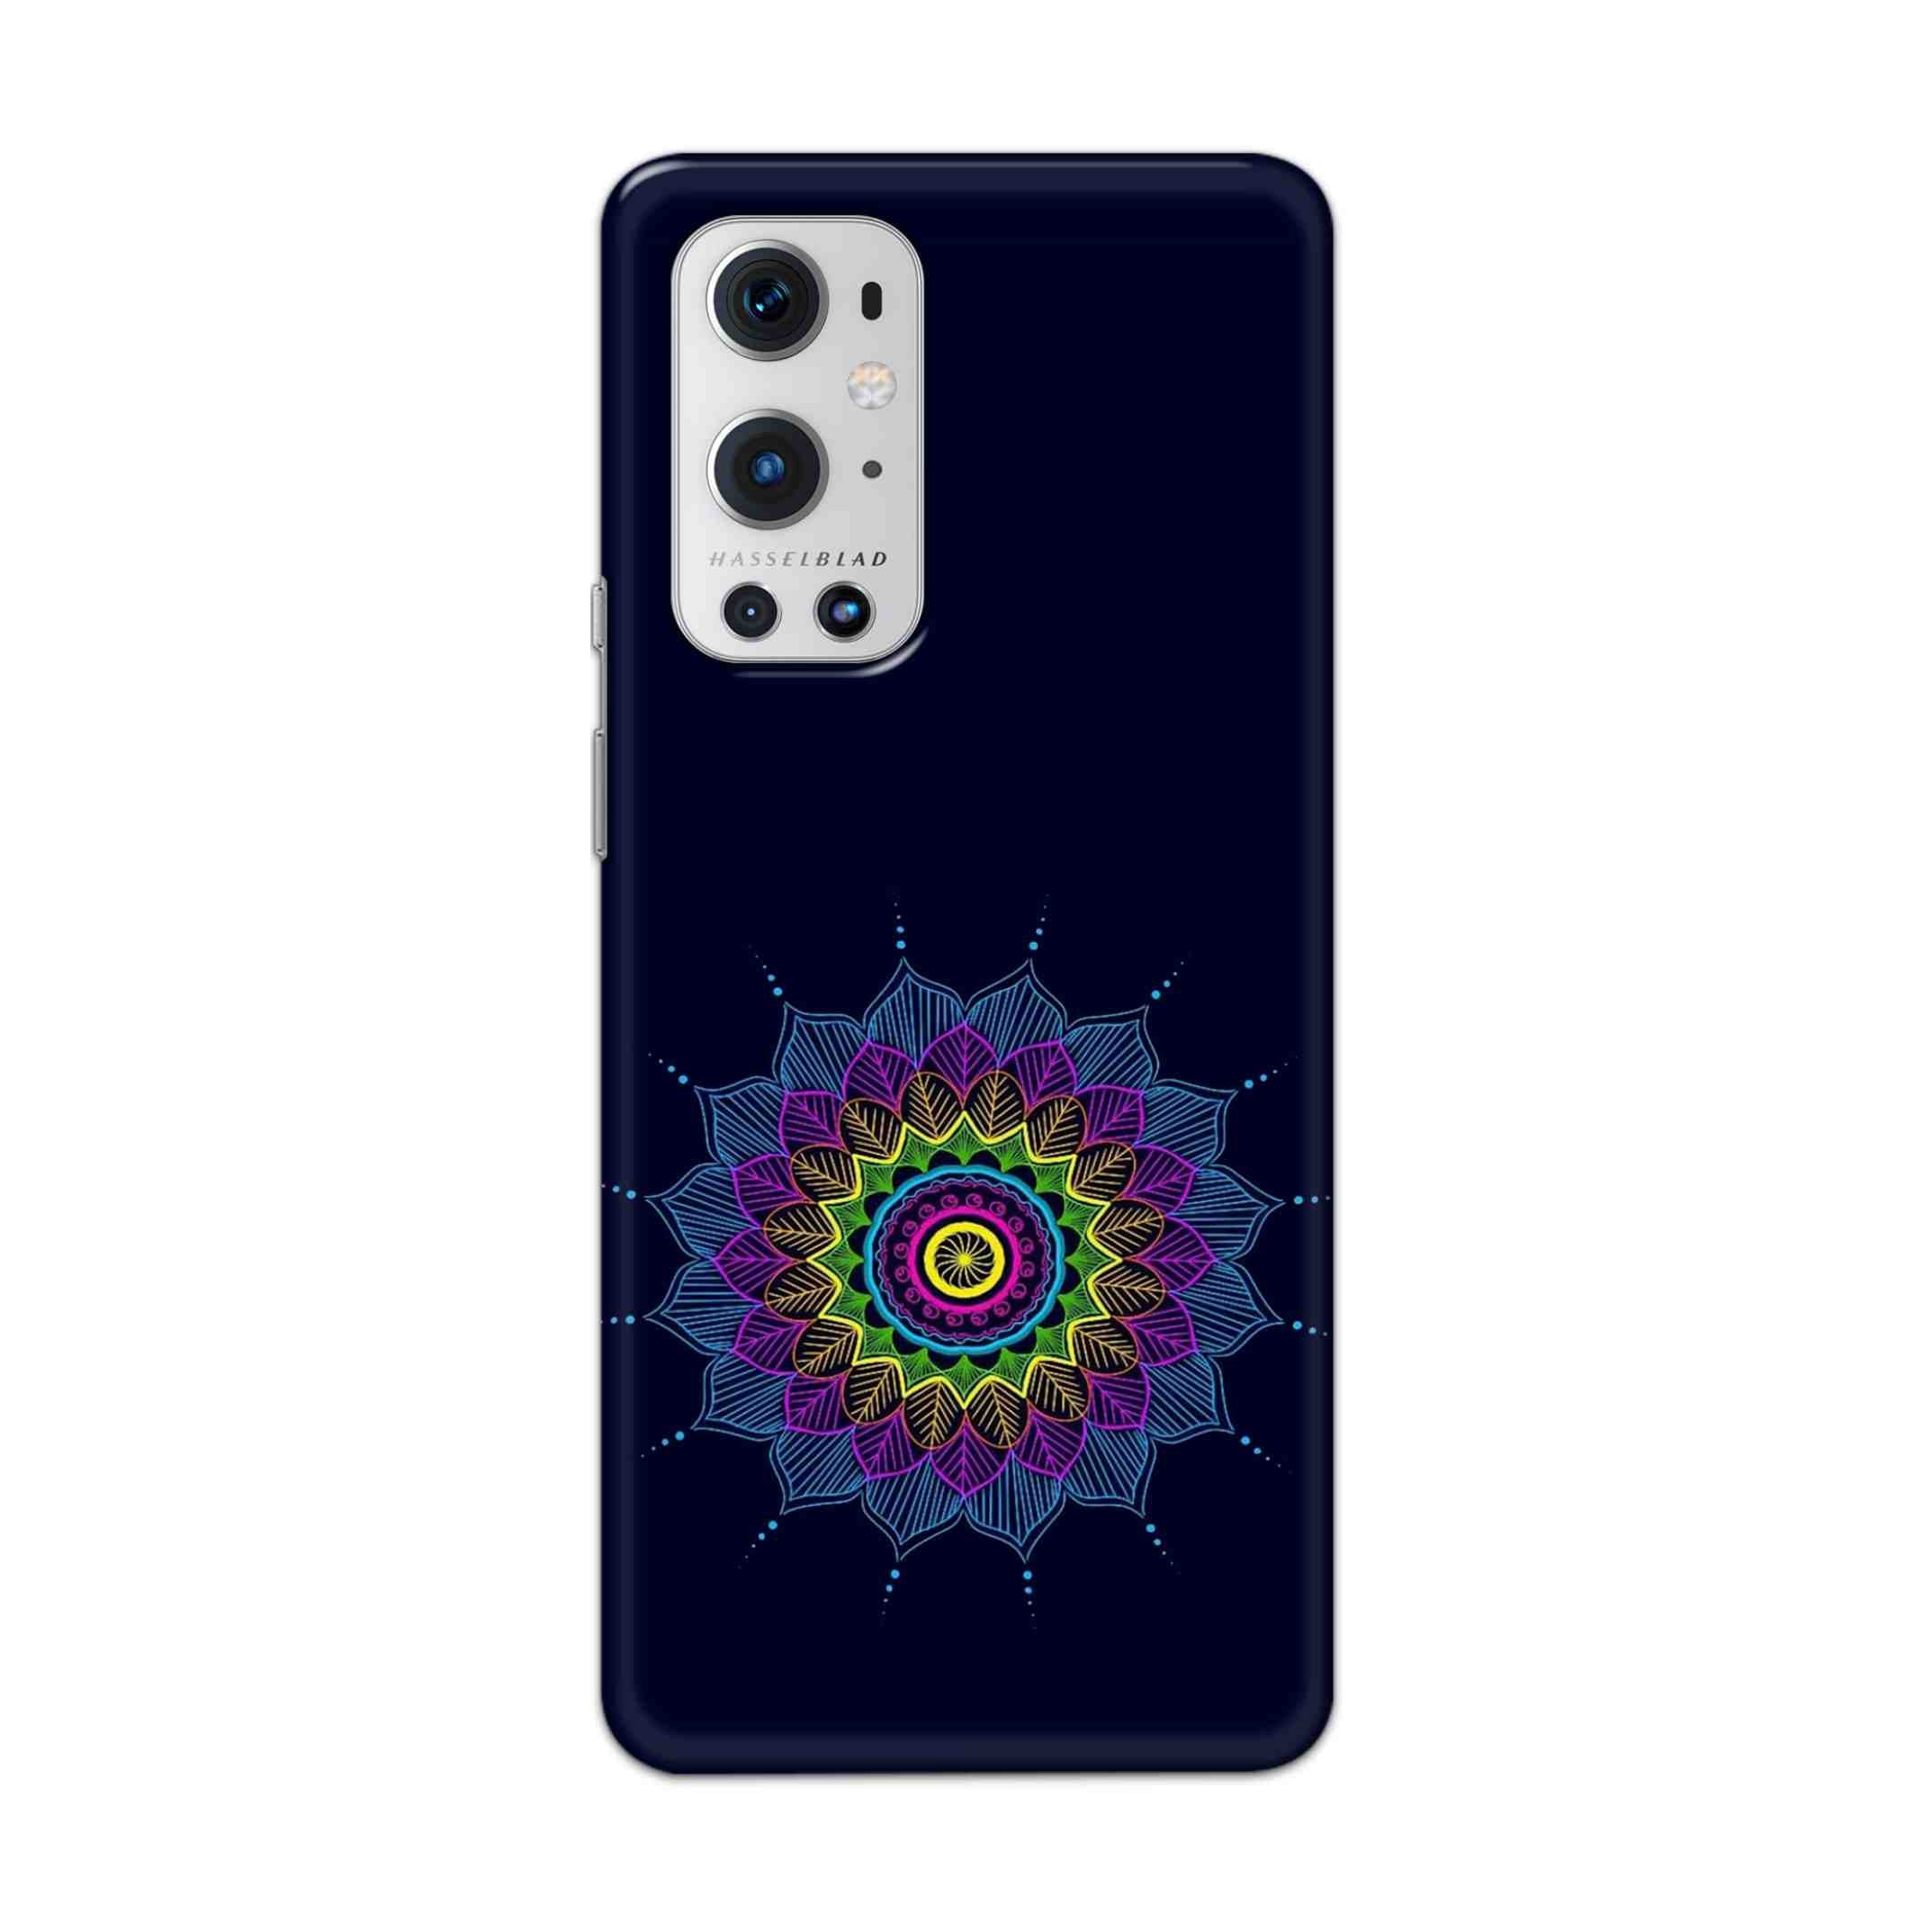 Buy Jung And Mandalas Hard Back Mobile Phone Case Cover For OnePlus 9 Pro Online